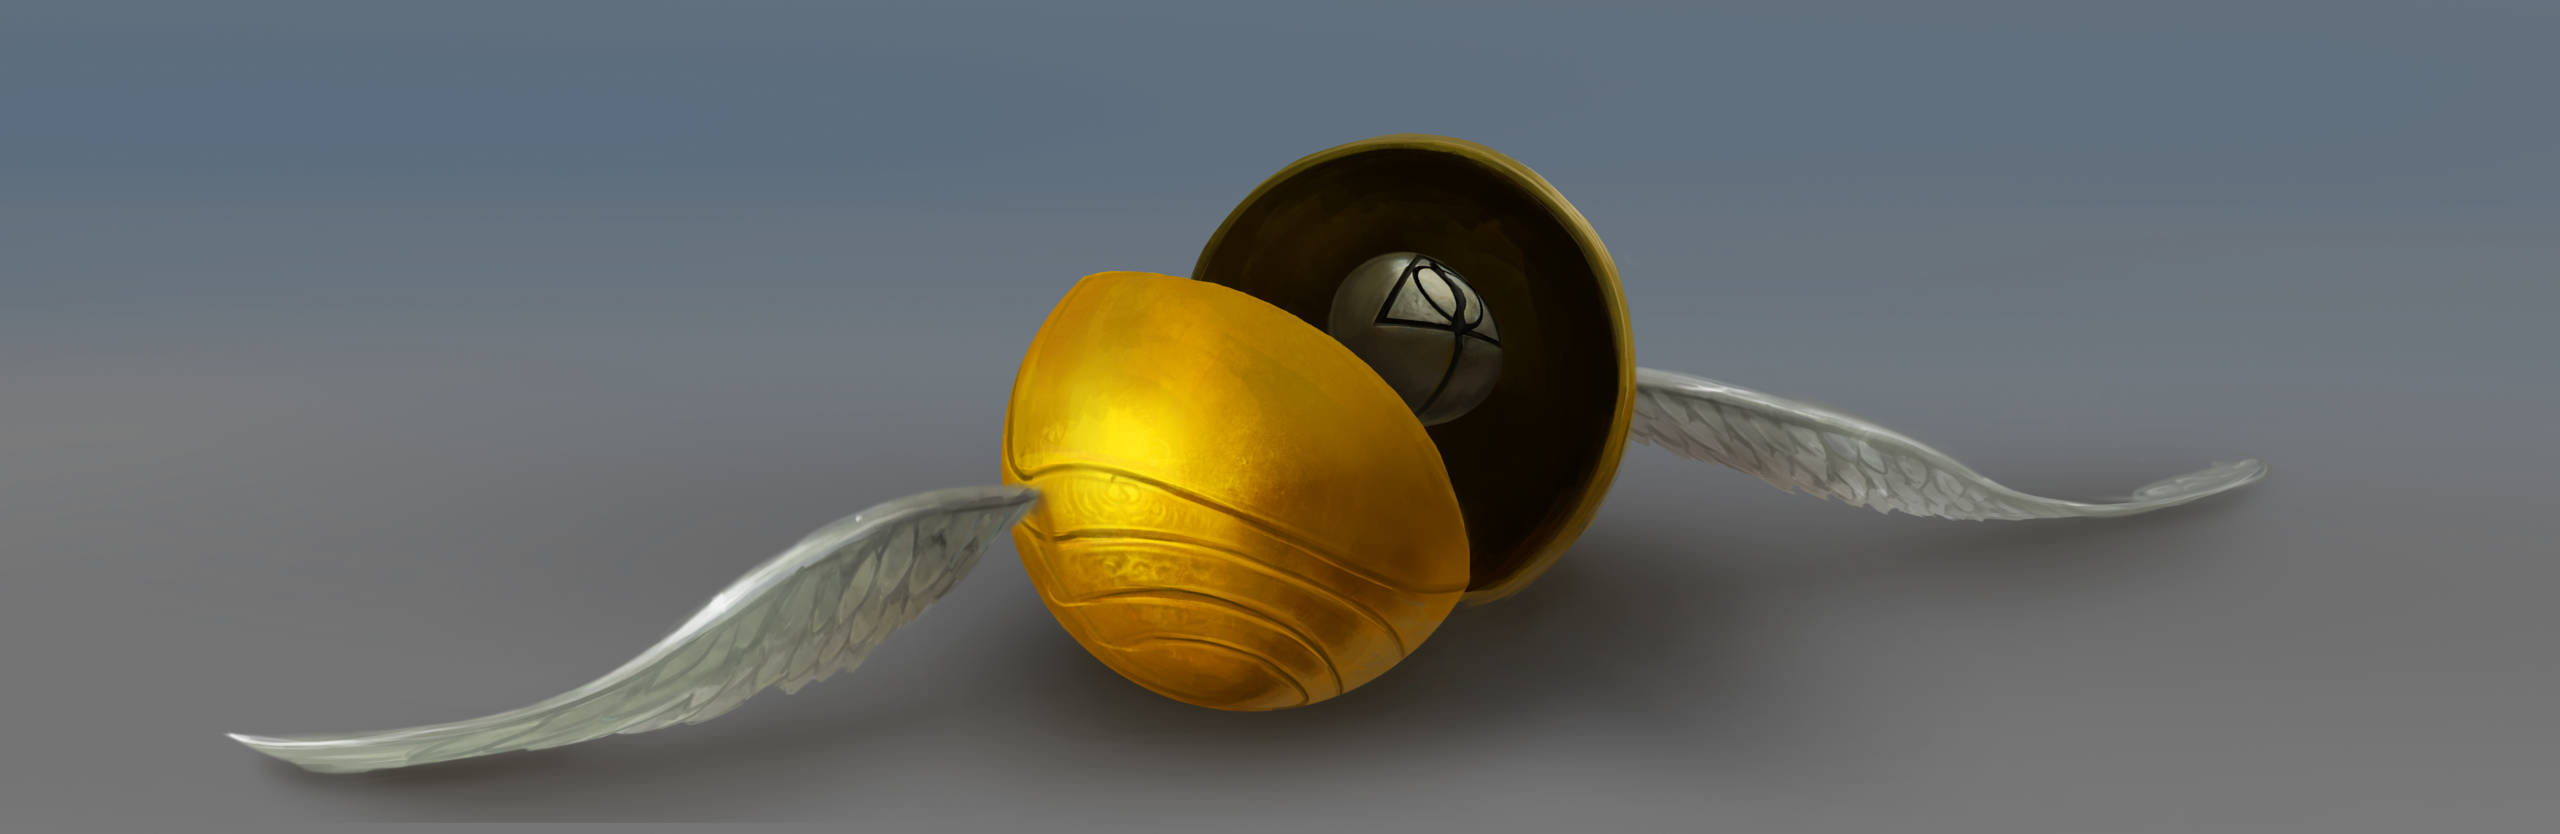 An open Golden Snitch, revealing the Resurrection Stone inside